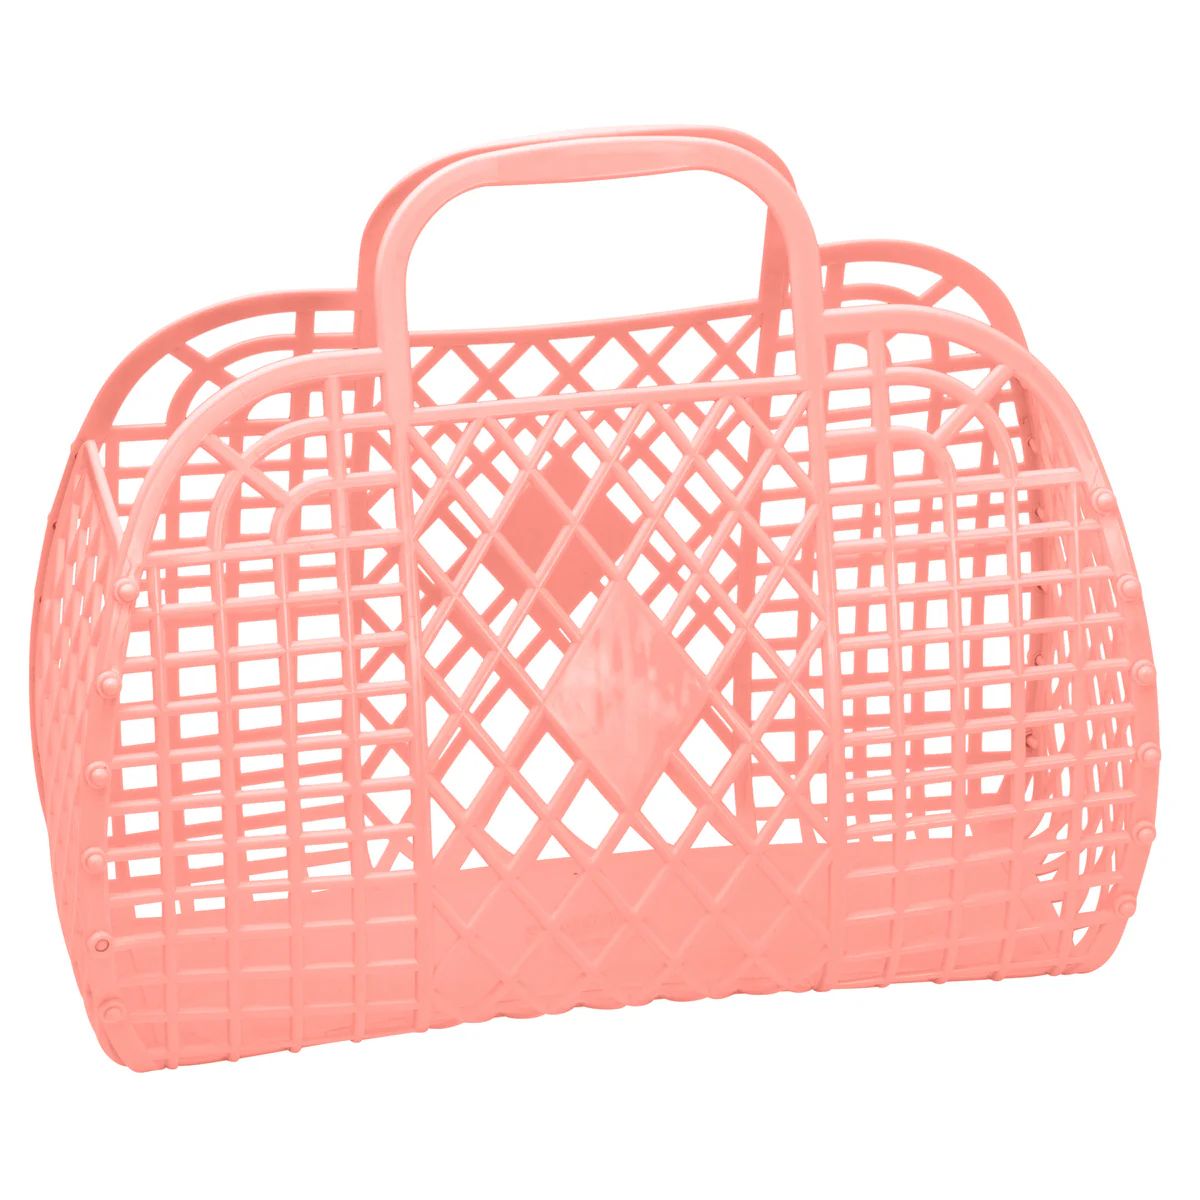 Large Retro Basket - Peach | Ellie and Piper